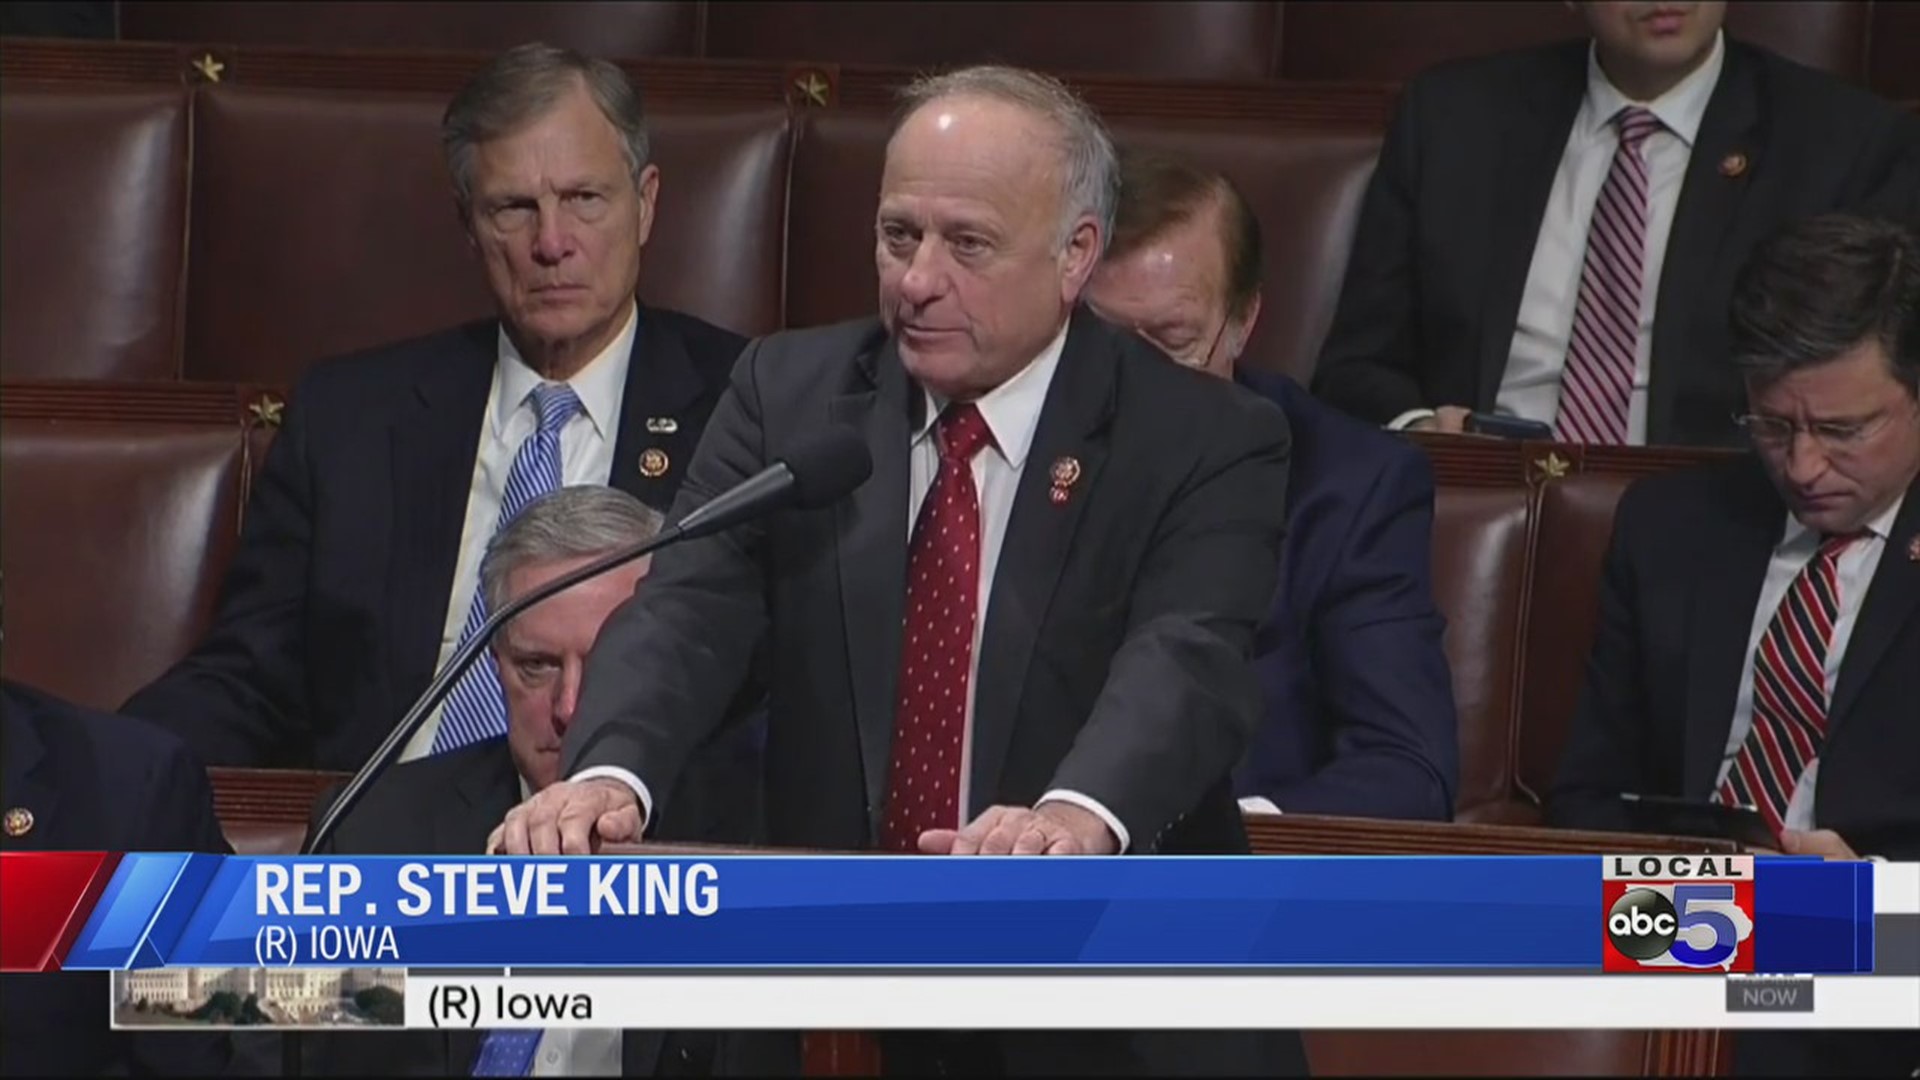 Rep. Steve King only Iowan to weight in at impeachment hearings